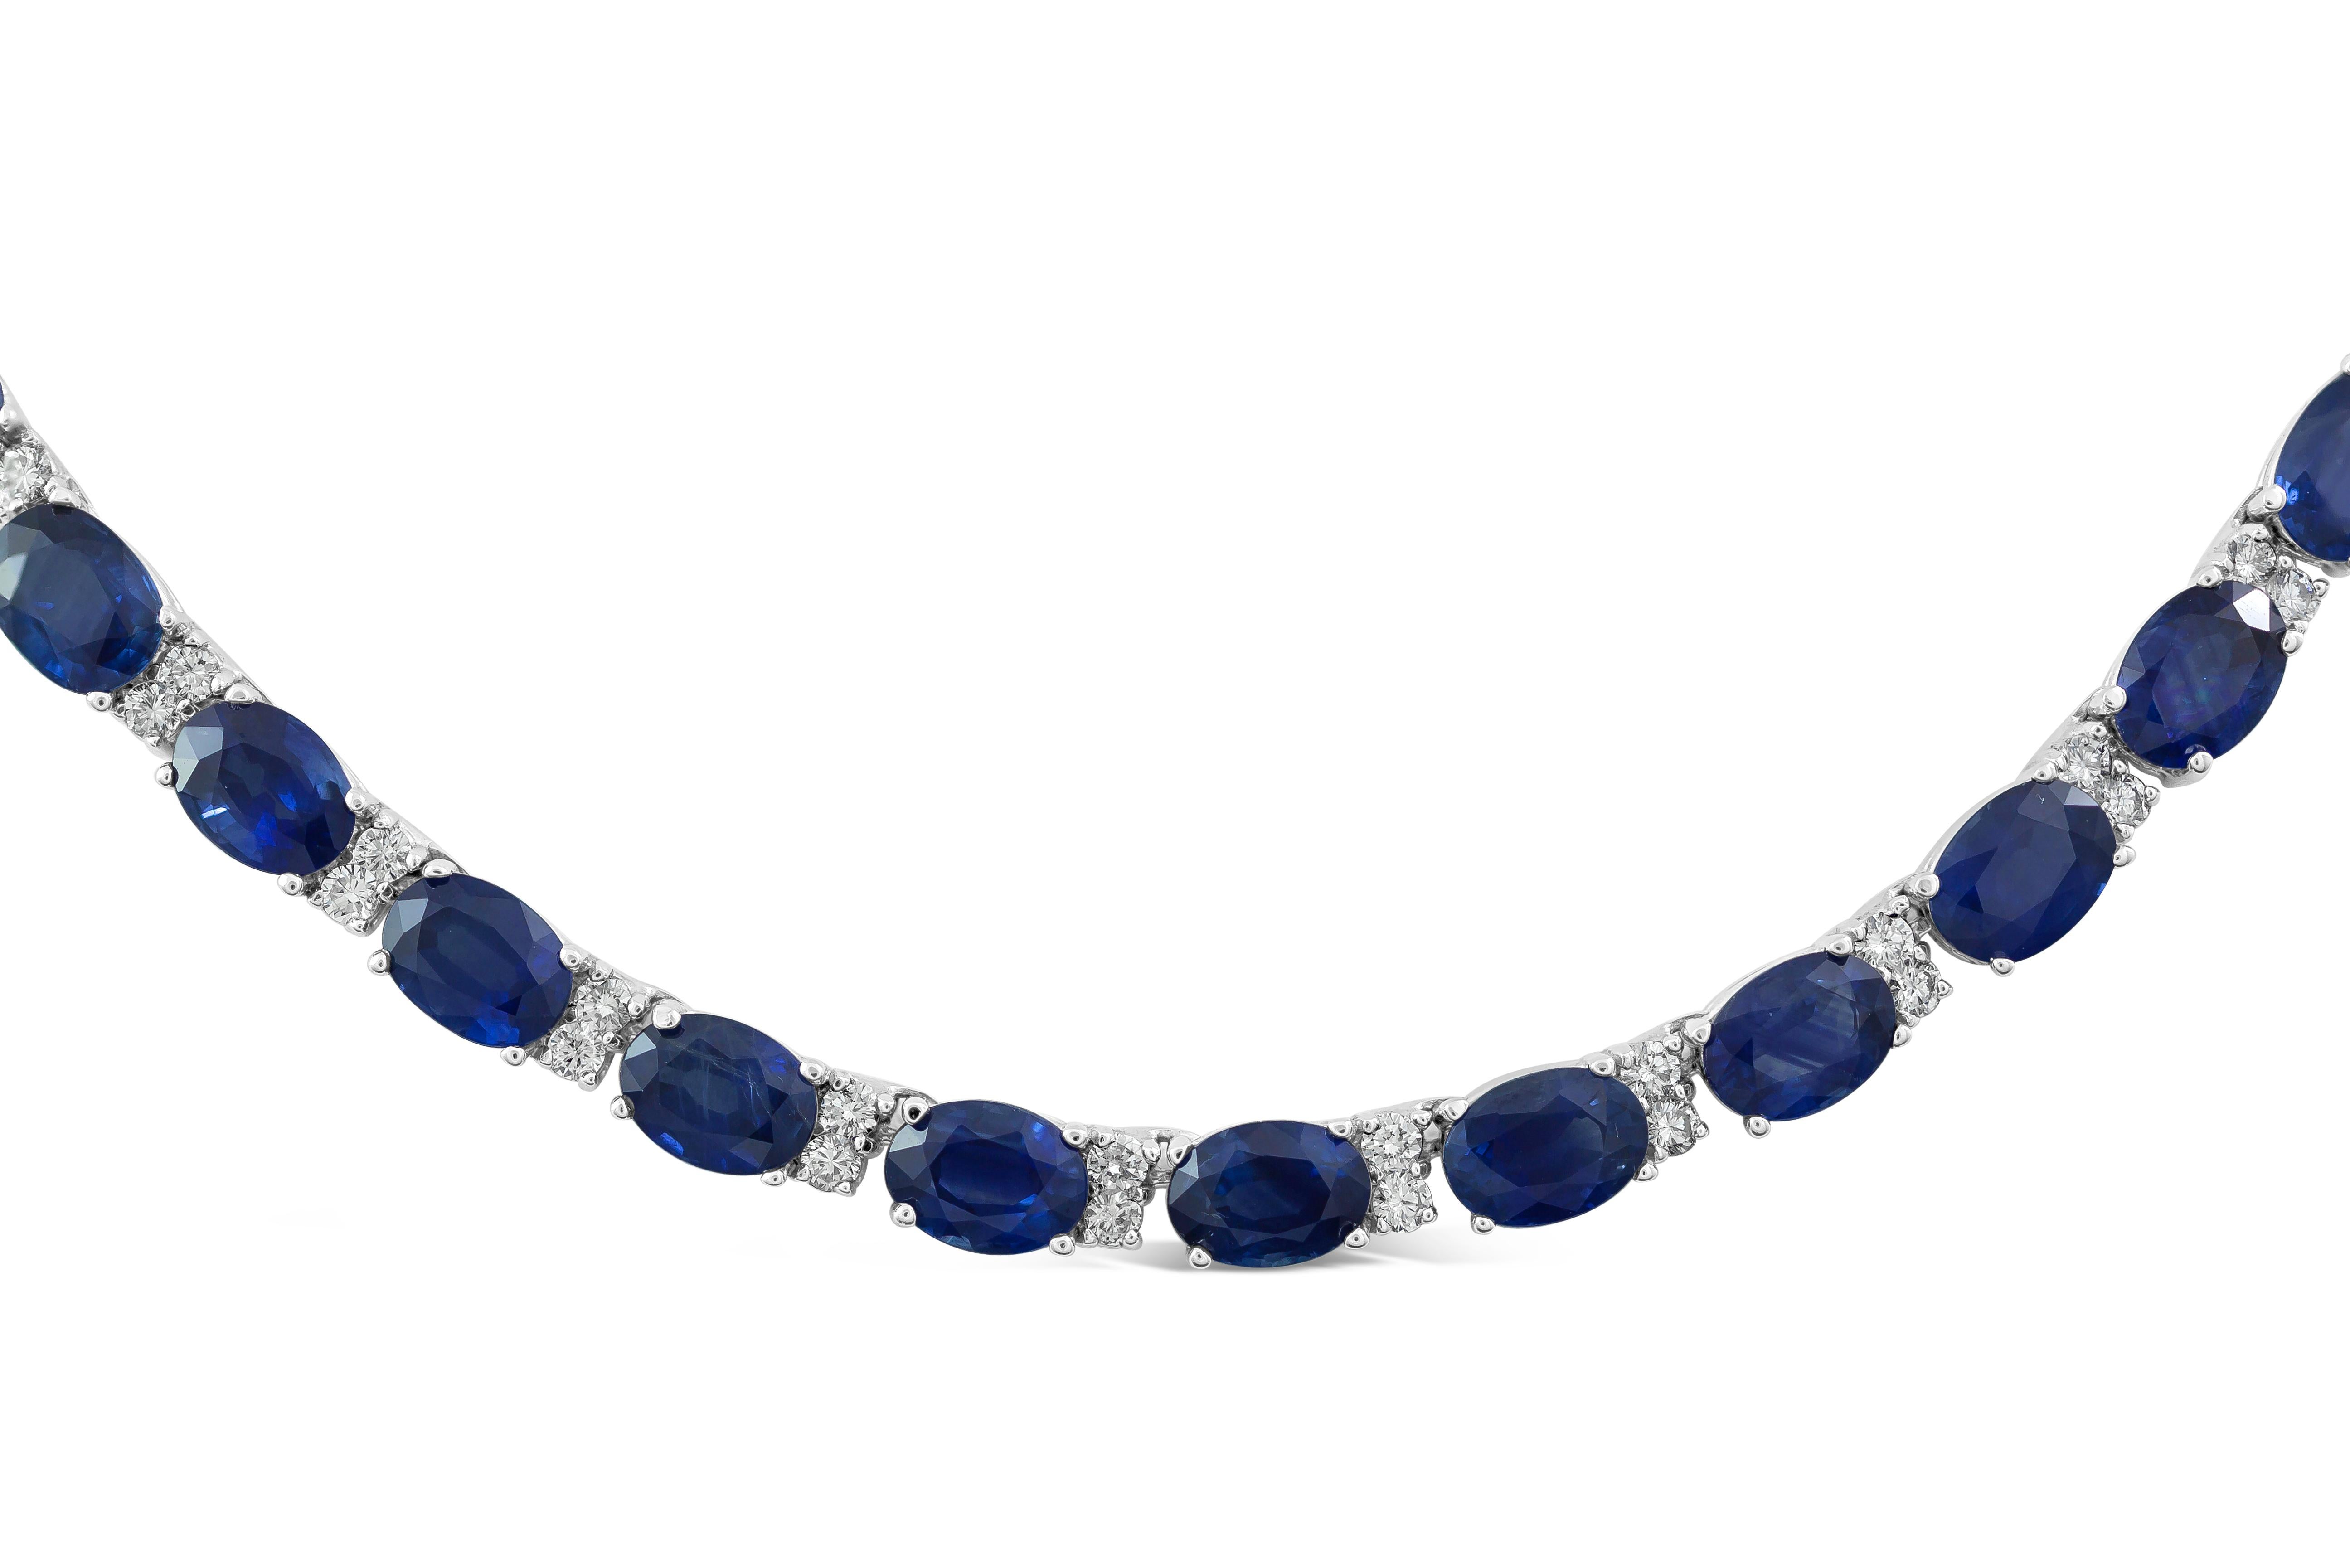 An incredibly color-rich tennis necklace showcasing  an amazing 43.86 carats total of oval cut blue sapphires set in 18 karat white gold. Each sapphire is elegantly spaced by 2 round brilliant diamonds. Approximately 16 inches in length.

Style